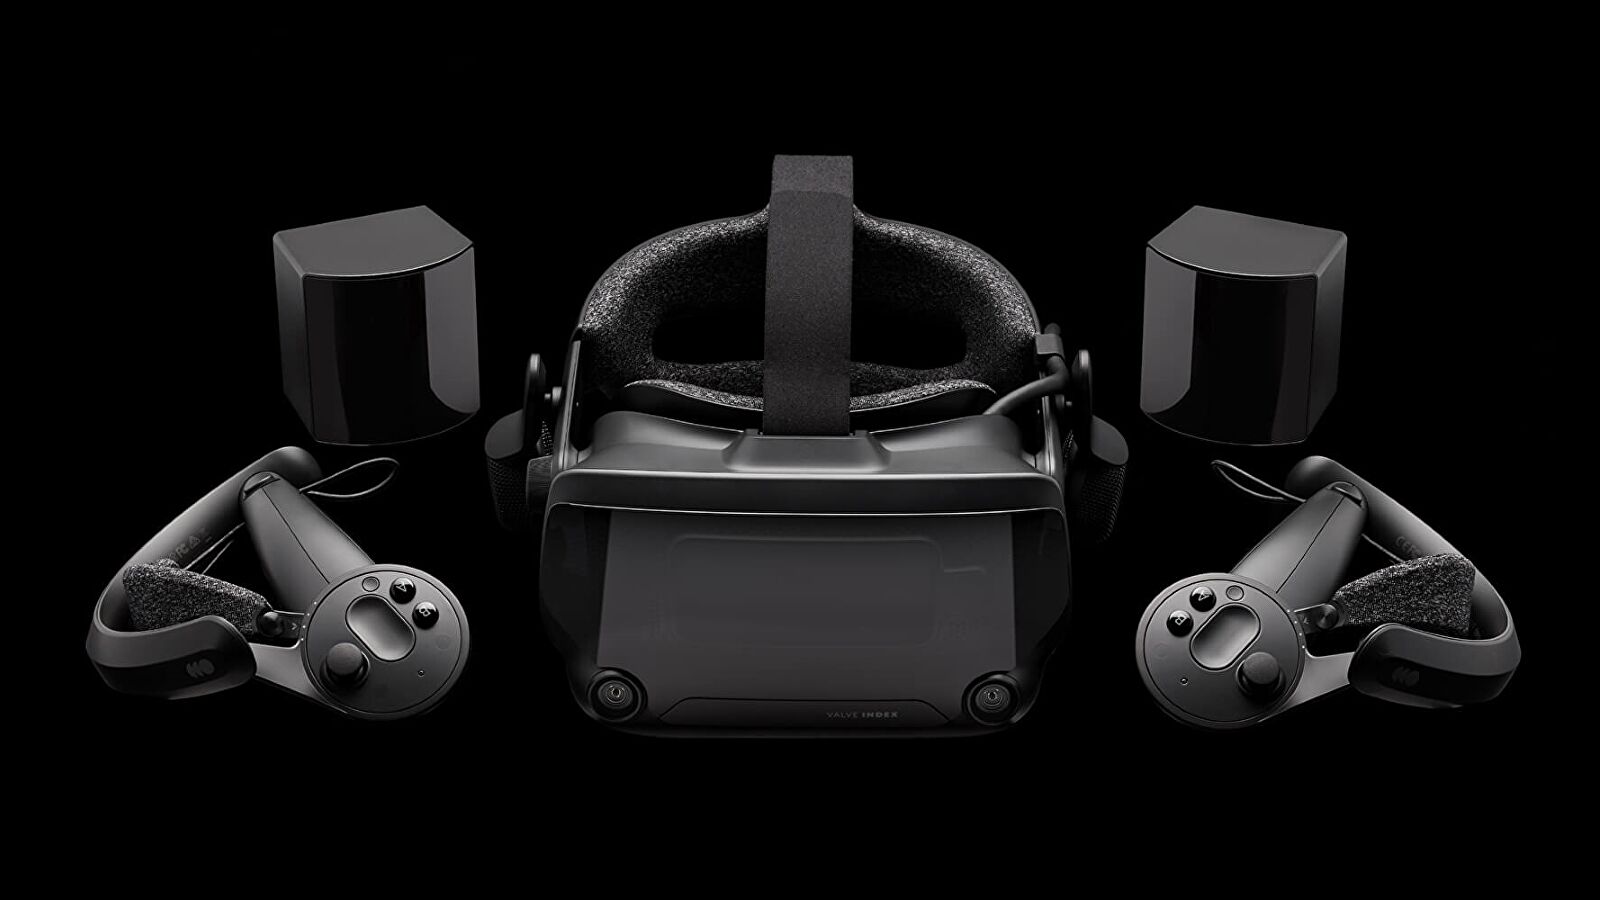 valve-have-been-awarded-a-new-patent-for-vr-controllers